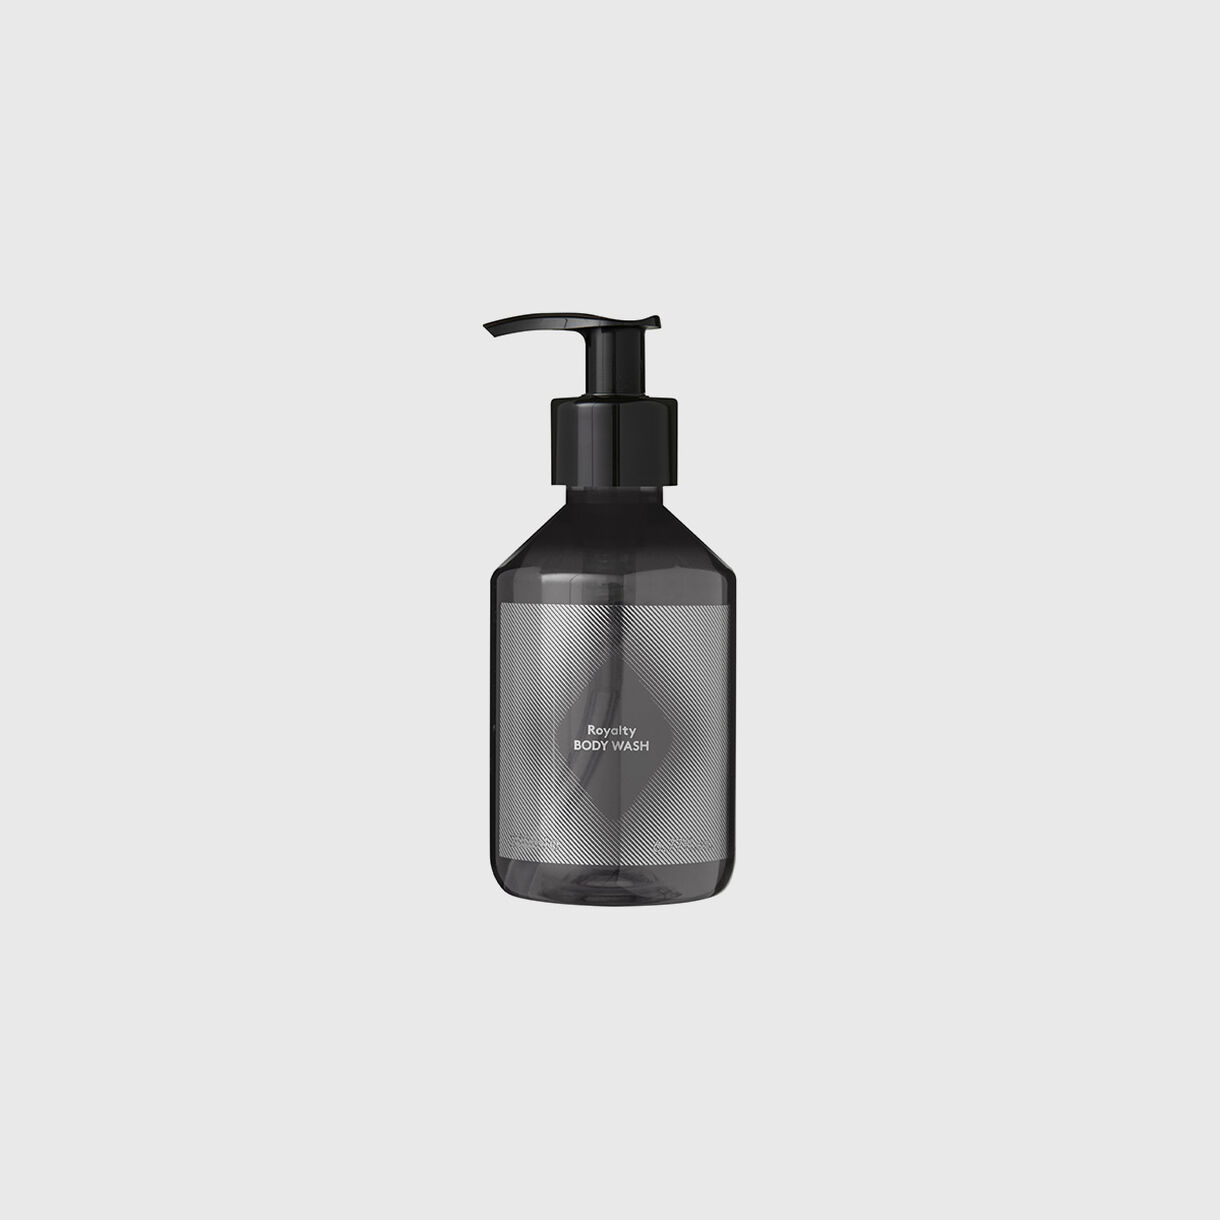 Eclectic Royalty Body Wash, 200ml